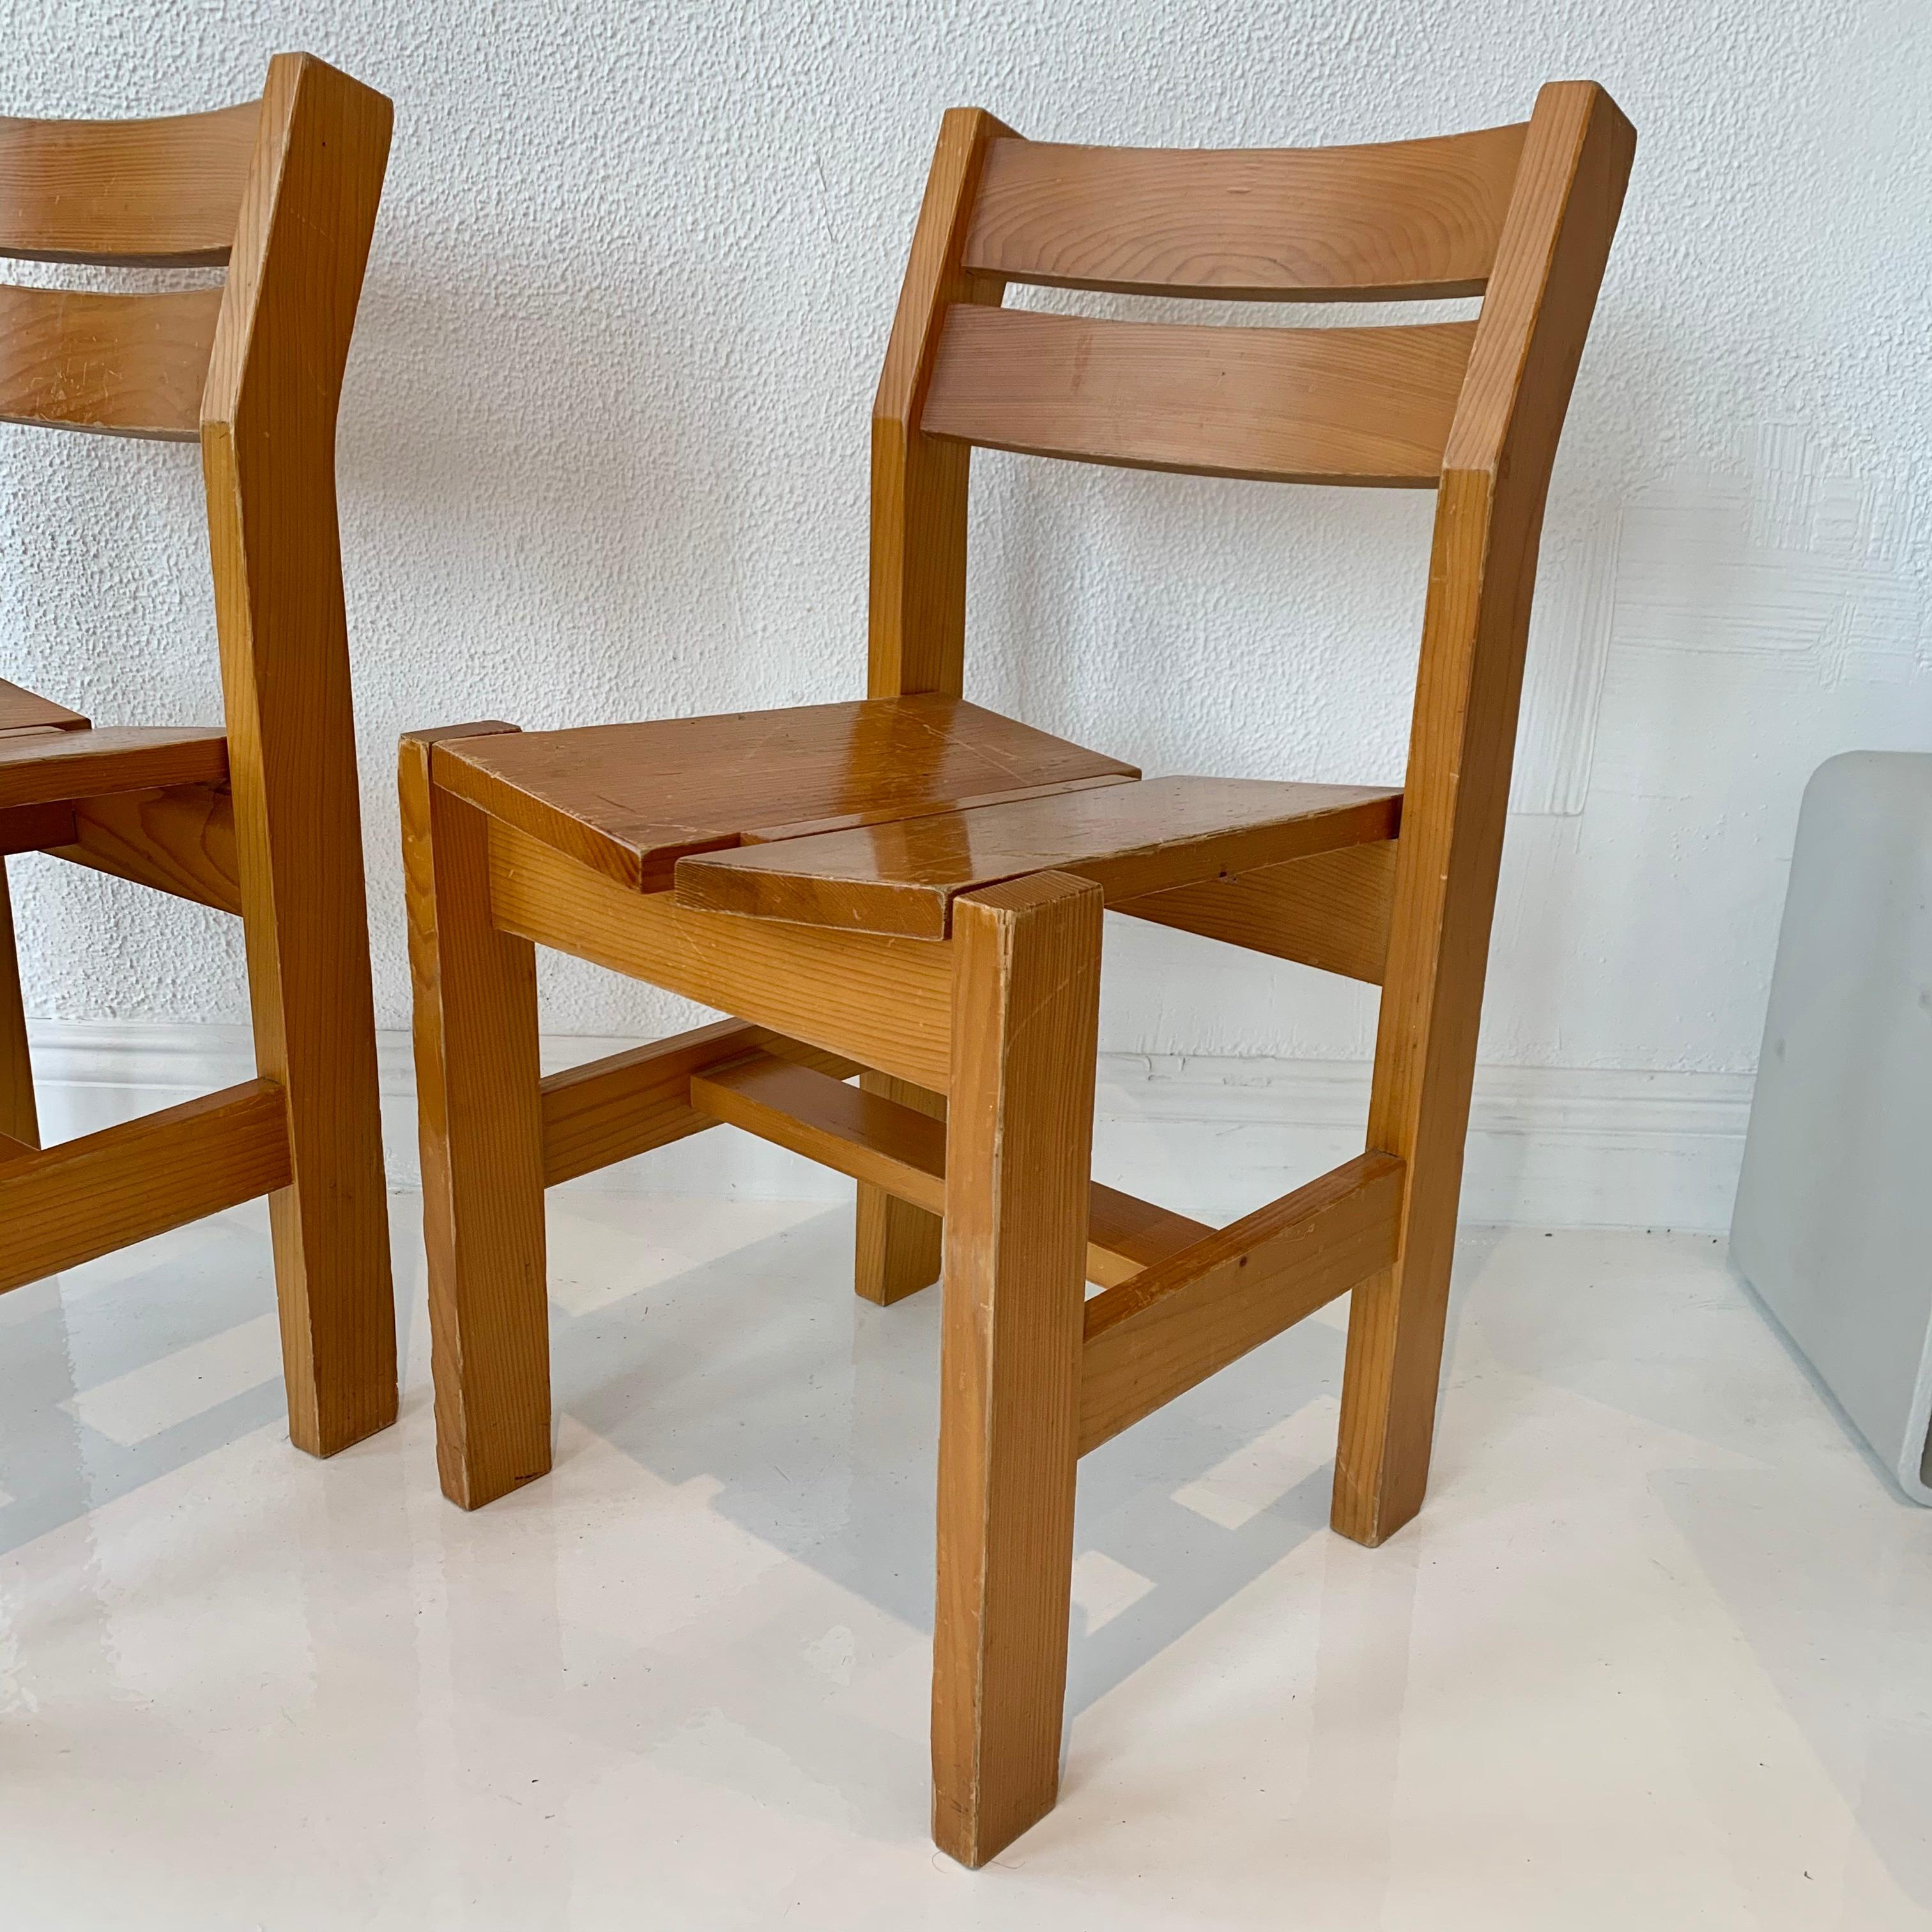 French Charlotte Perriand Chairs from 